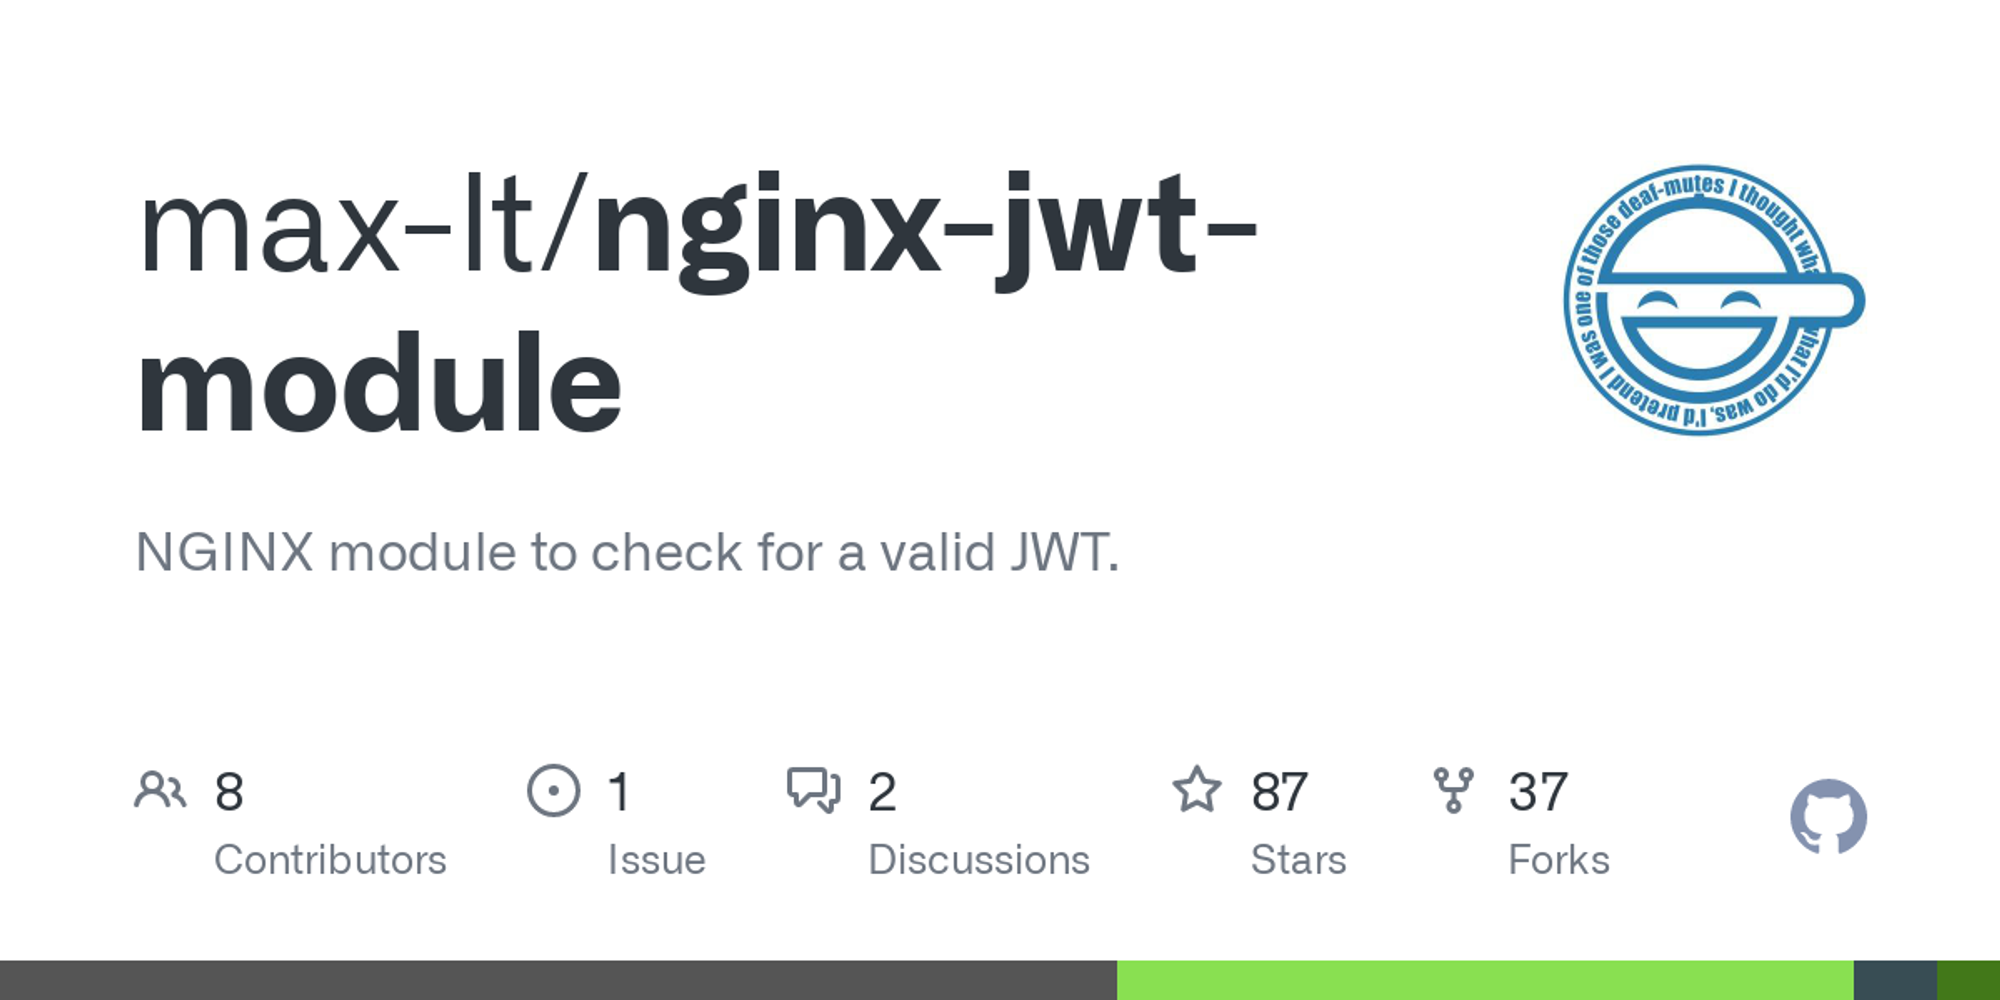 GitHub - max-lt/nginx-jwt-module: NGINX module to check for a valid JWT.